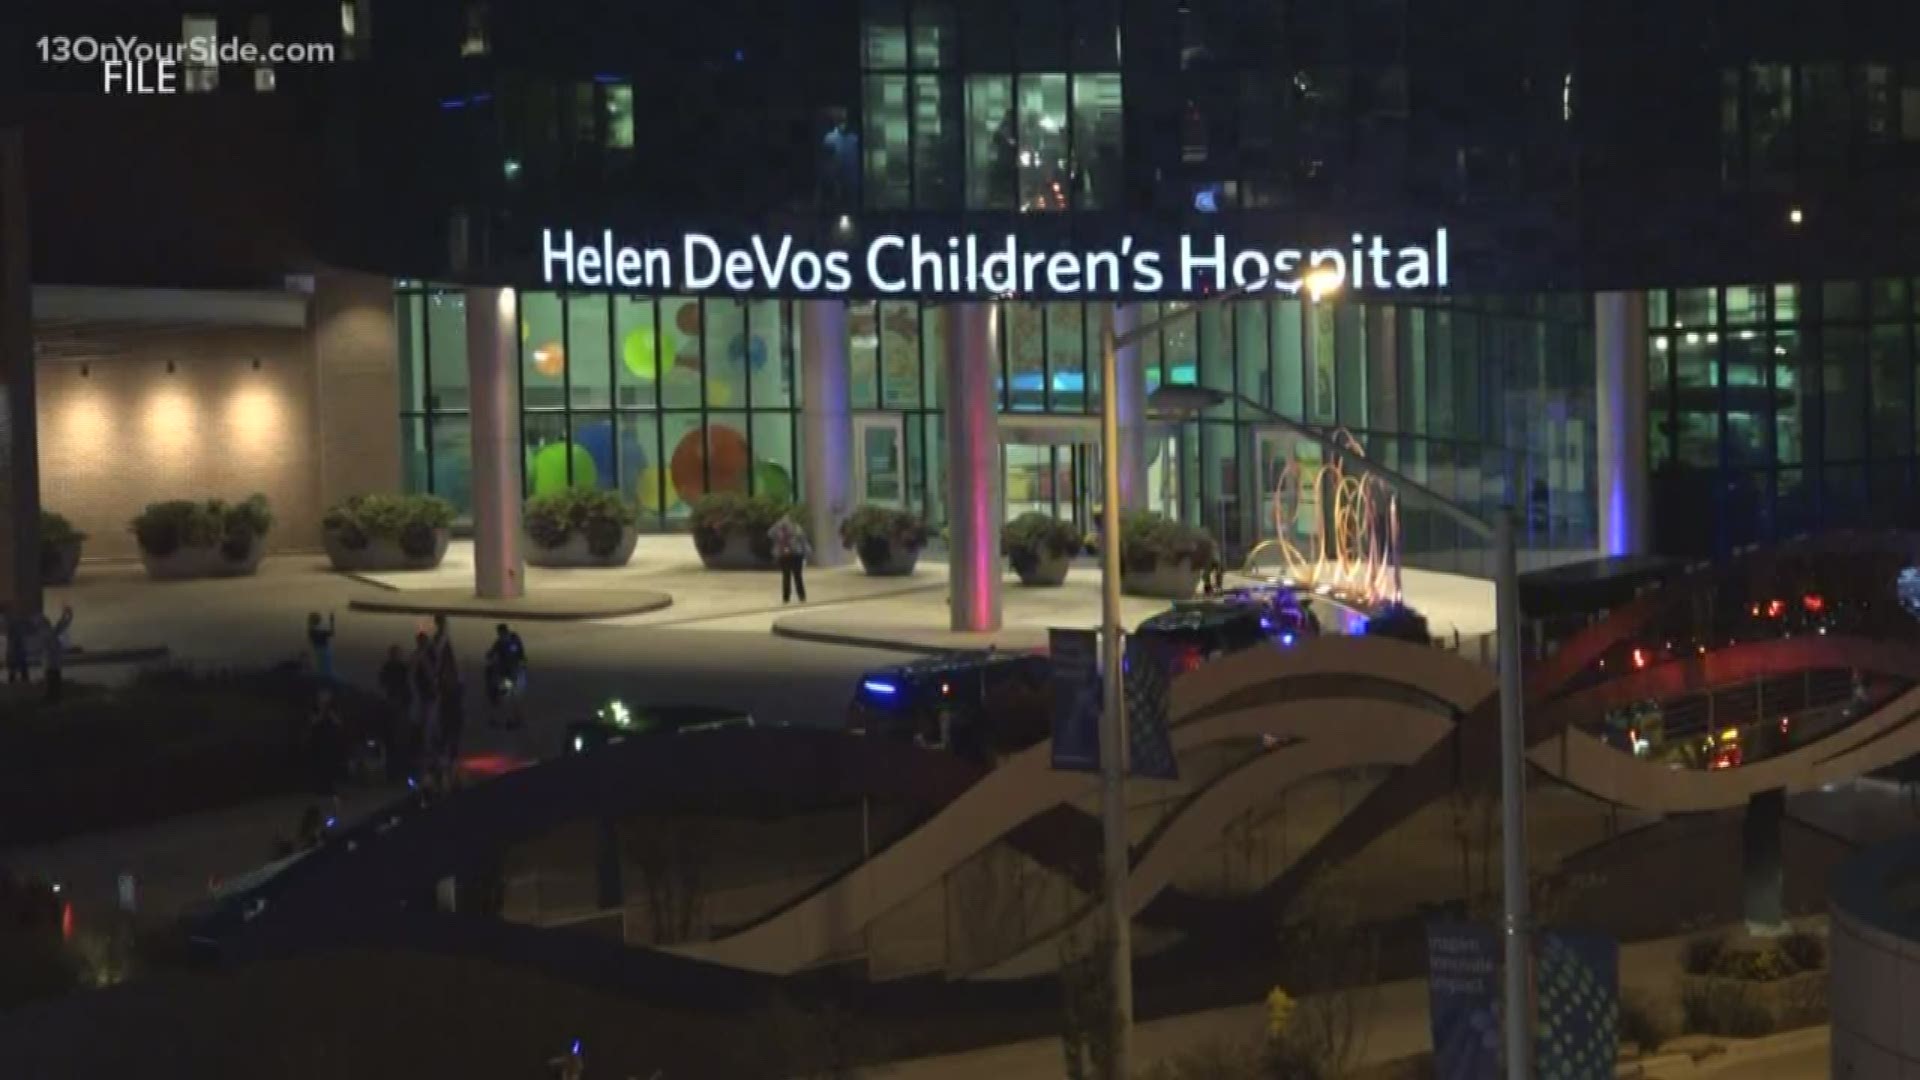 Tonight is Project Night Light at Helen DeVos Children's Hospital. At 8:30 p.m. outside of the hospital downtown Grand Rapids, there will be police officers, firetrucks and community members flashing lights up at the kids showing love and support in their recoveries. It will last about 10 minutes and it's something you don't want to miss.